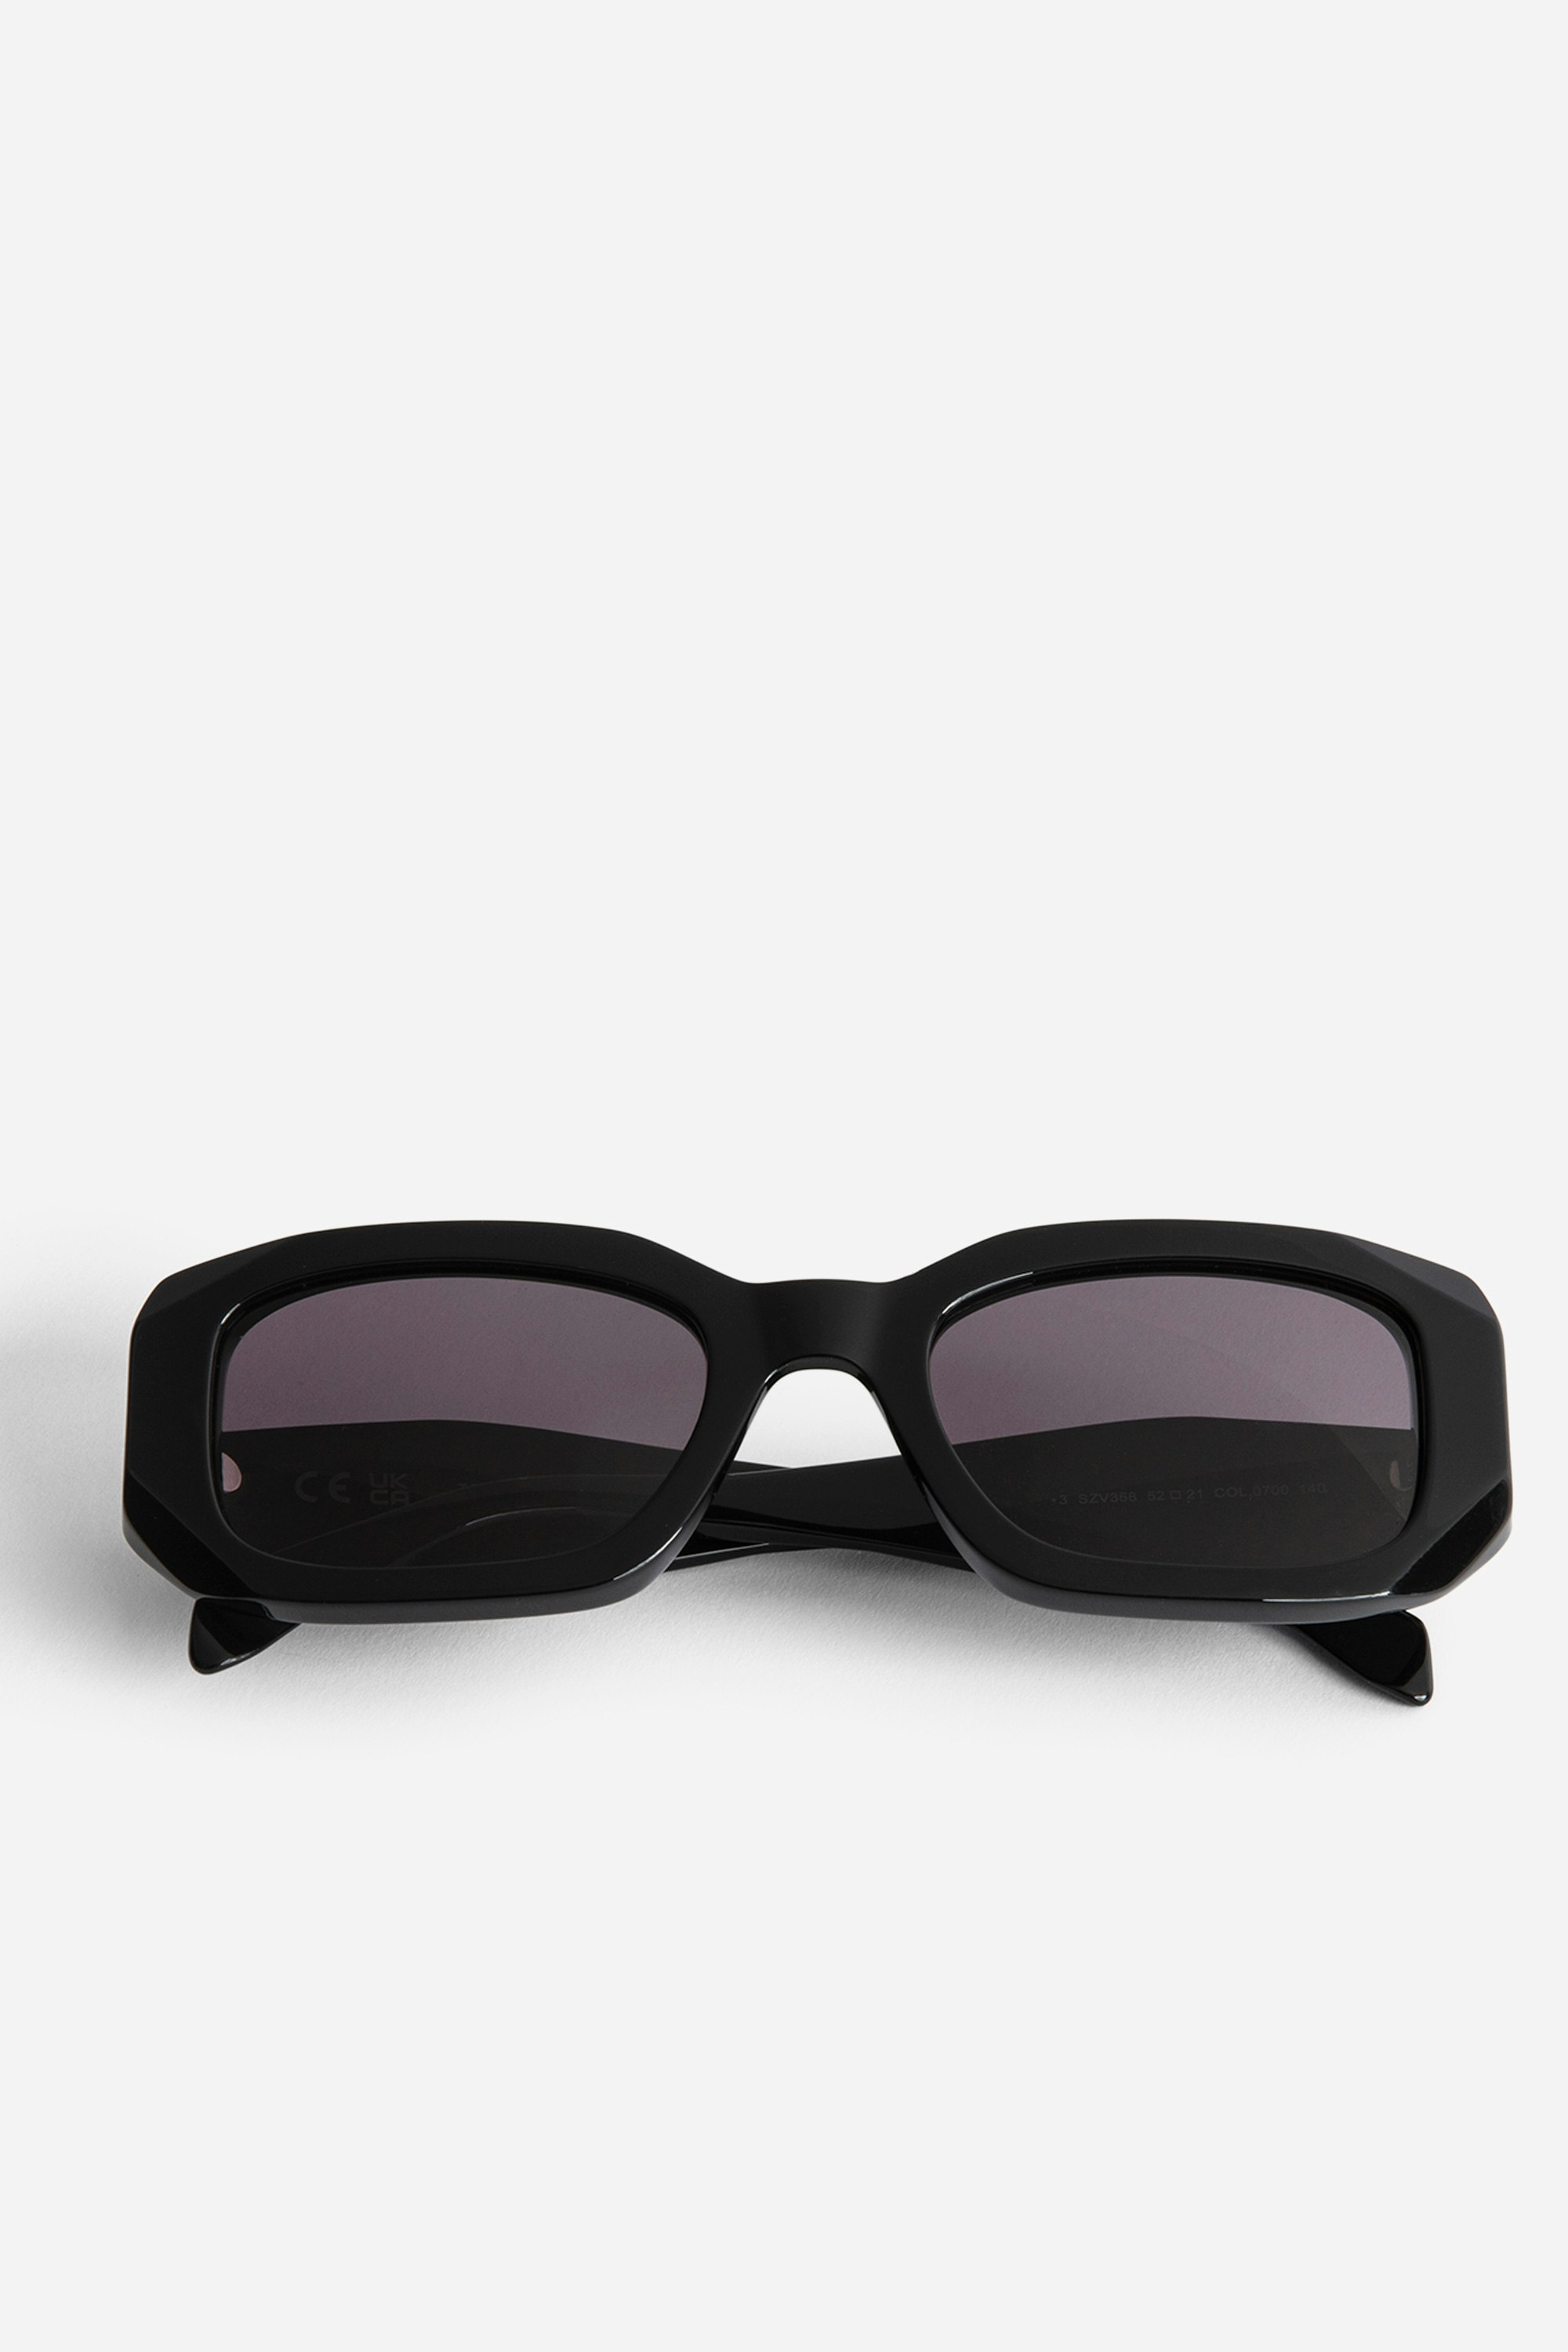 ZV23H3 Sunglasses Unisex black rectangular sunglasses with wings on the unstructured temples.